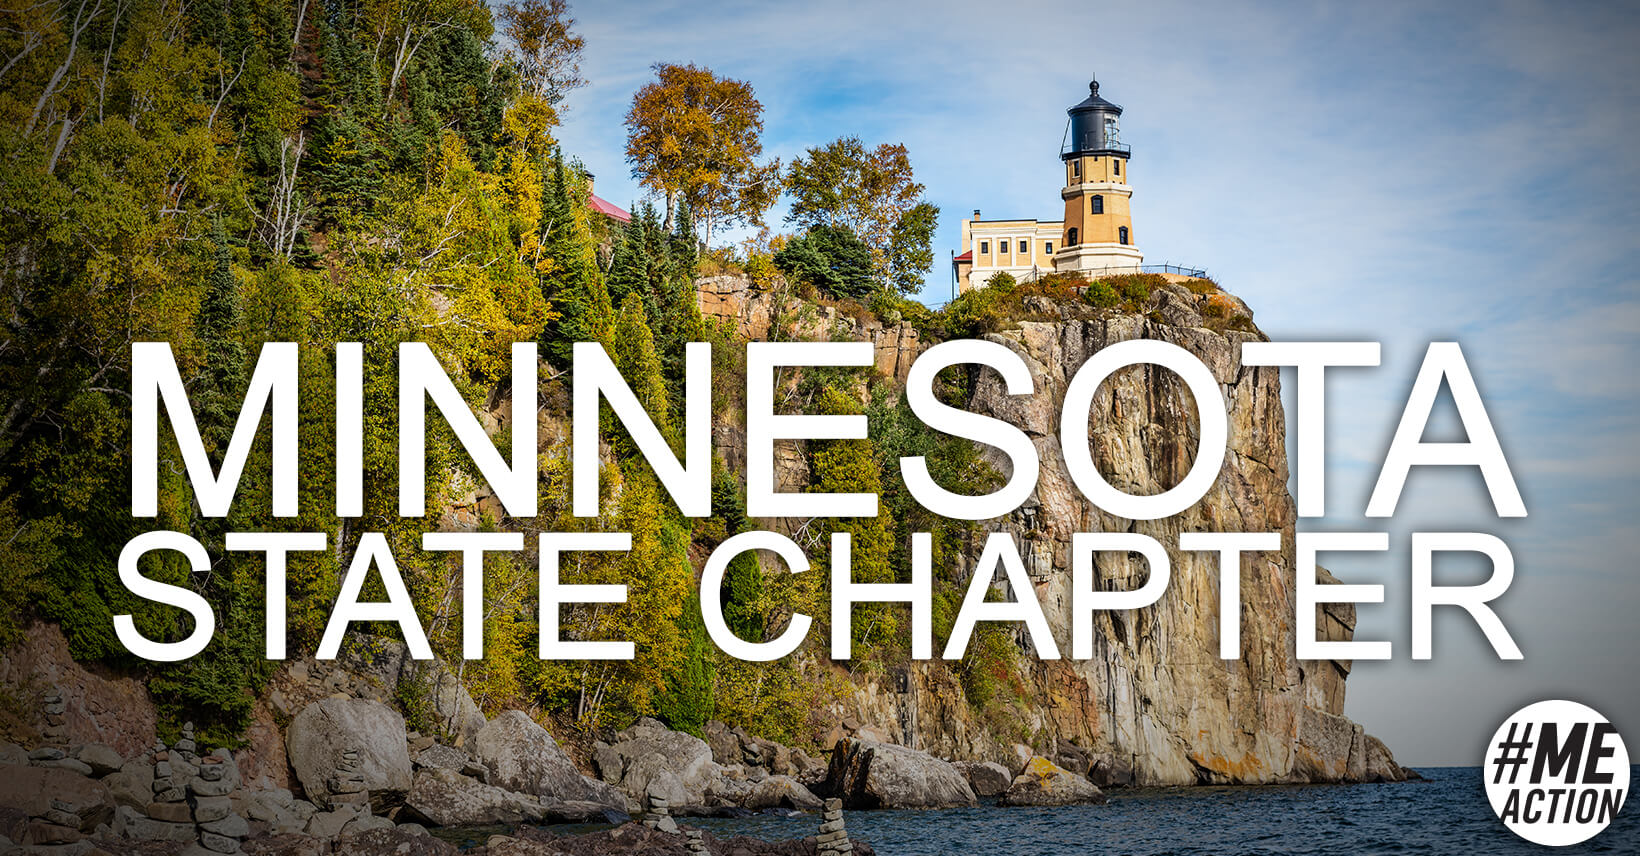 Minnesota State Chapter listed across a photo a lighthouse on a cliff. #MEAction logo in the bottom right corner